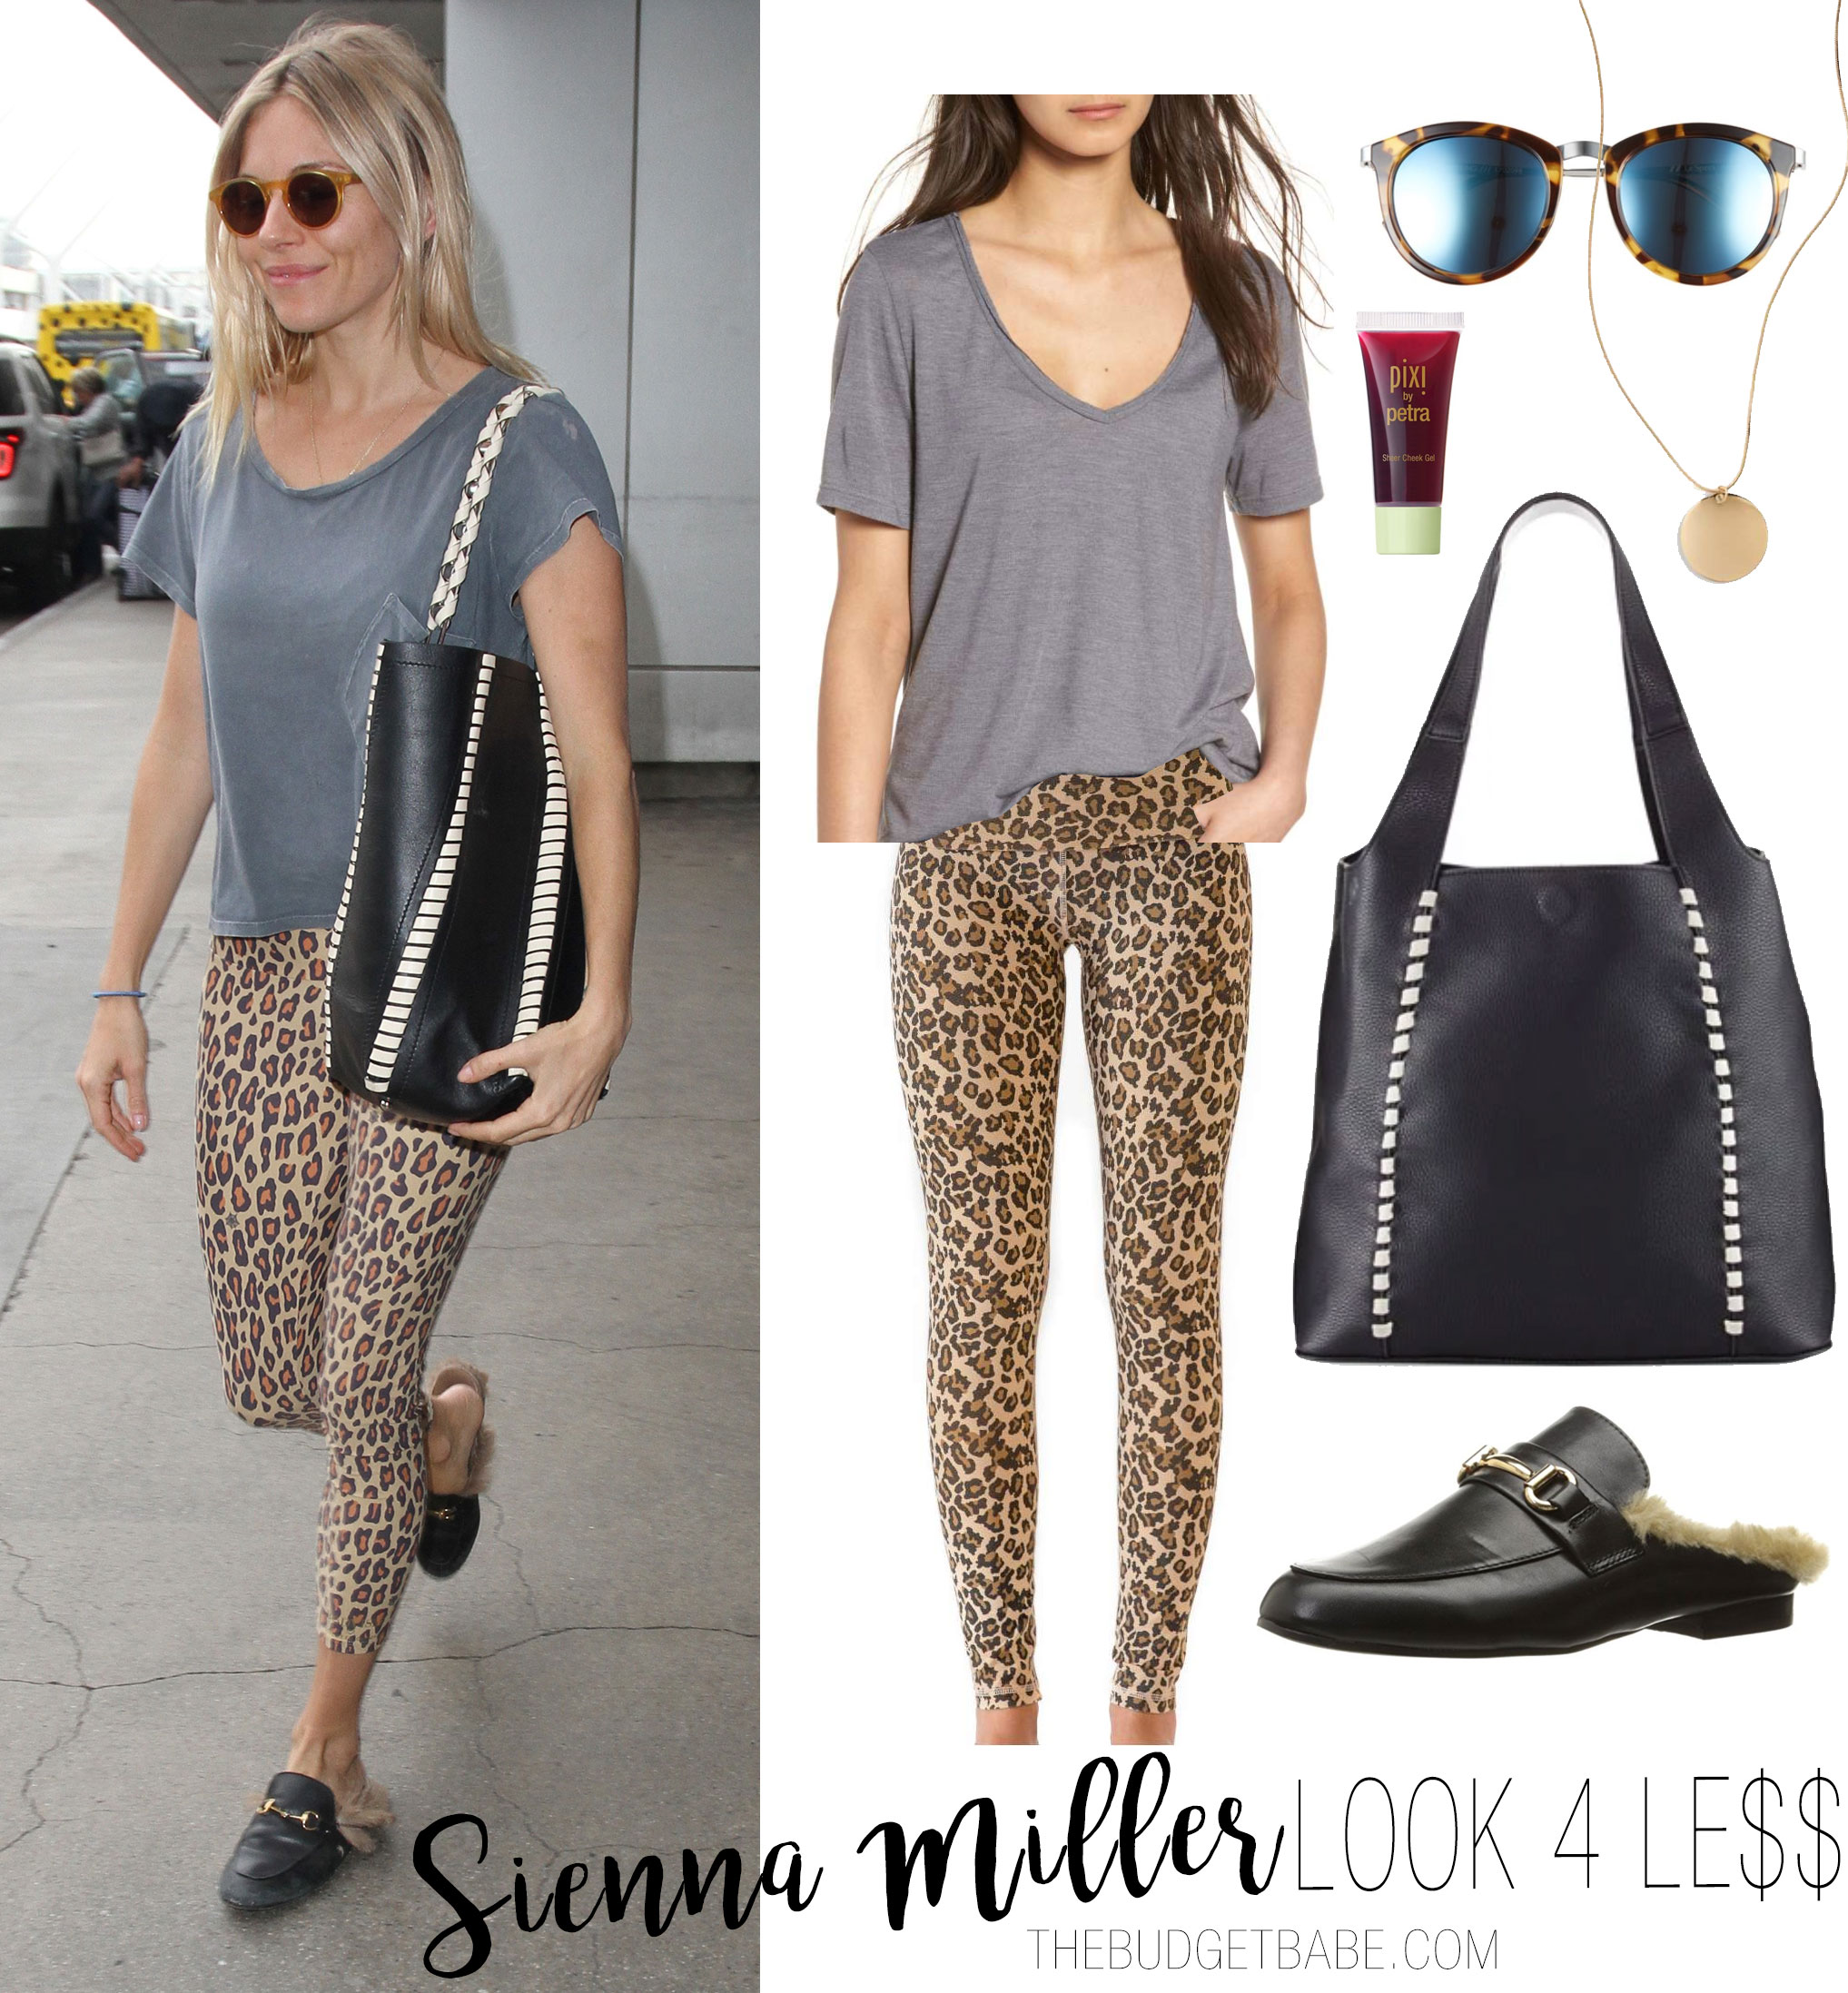 Shop Sienna Miller's leopard leggings and Gucci mules look for less.